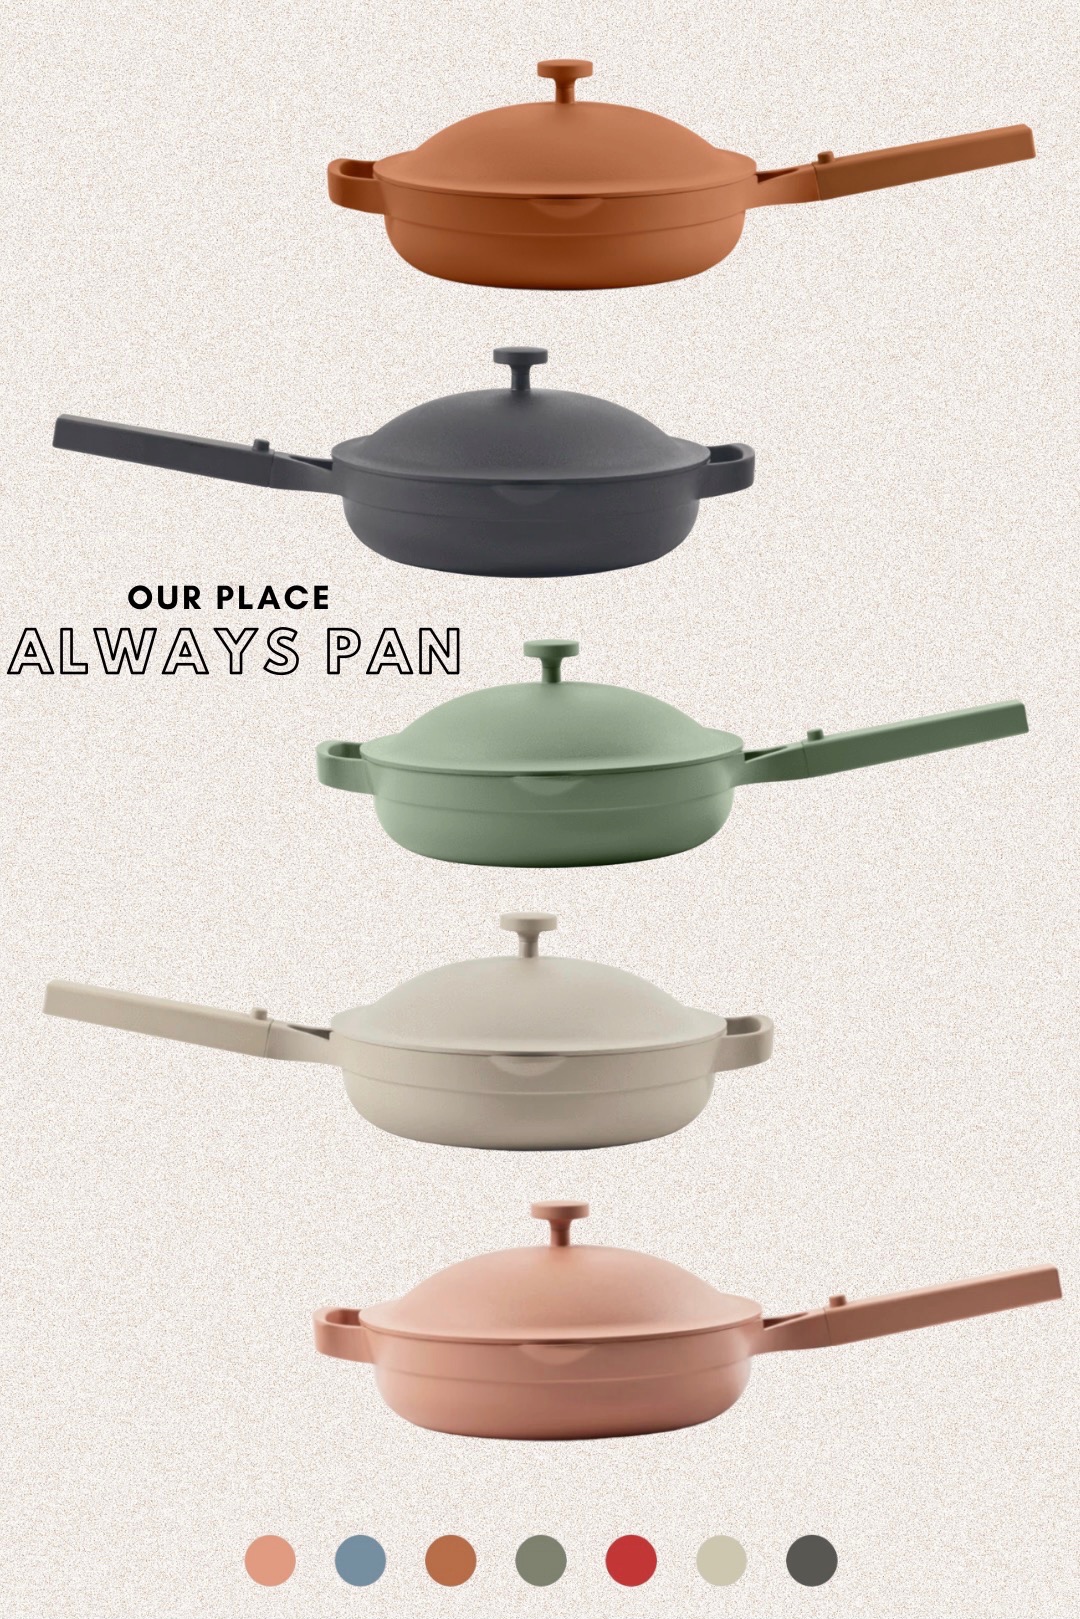 Our Place - Always Pans